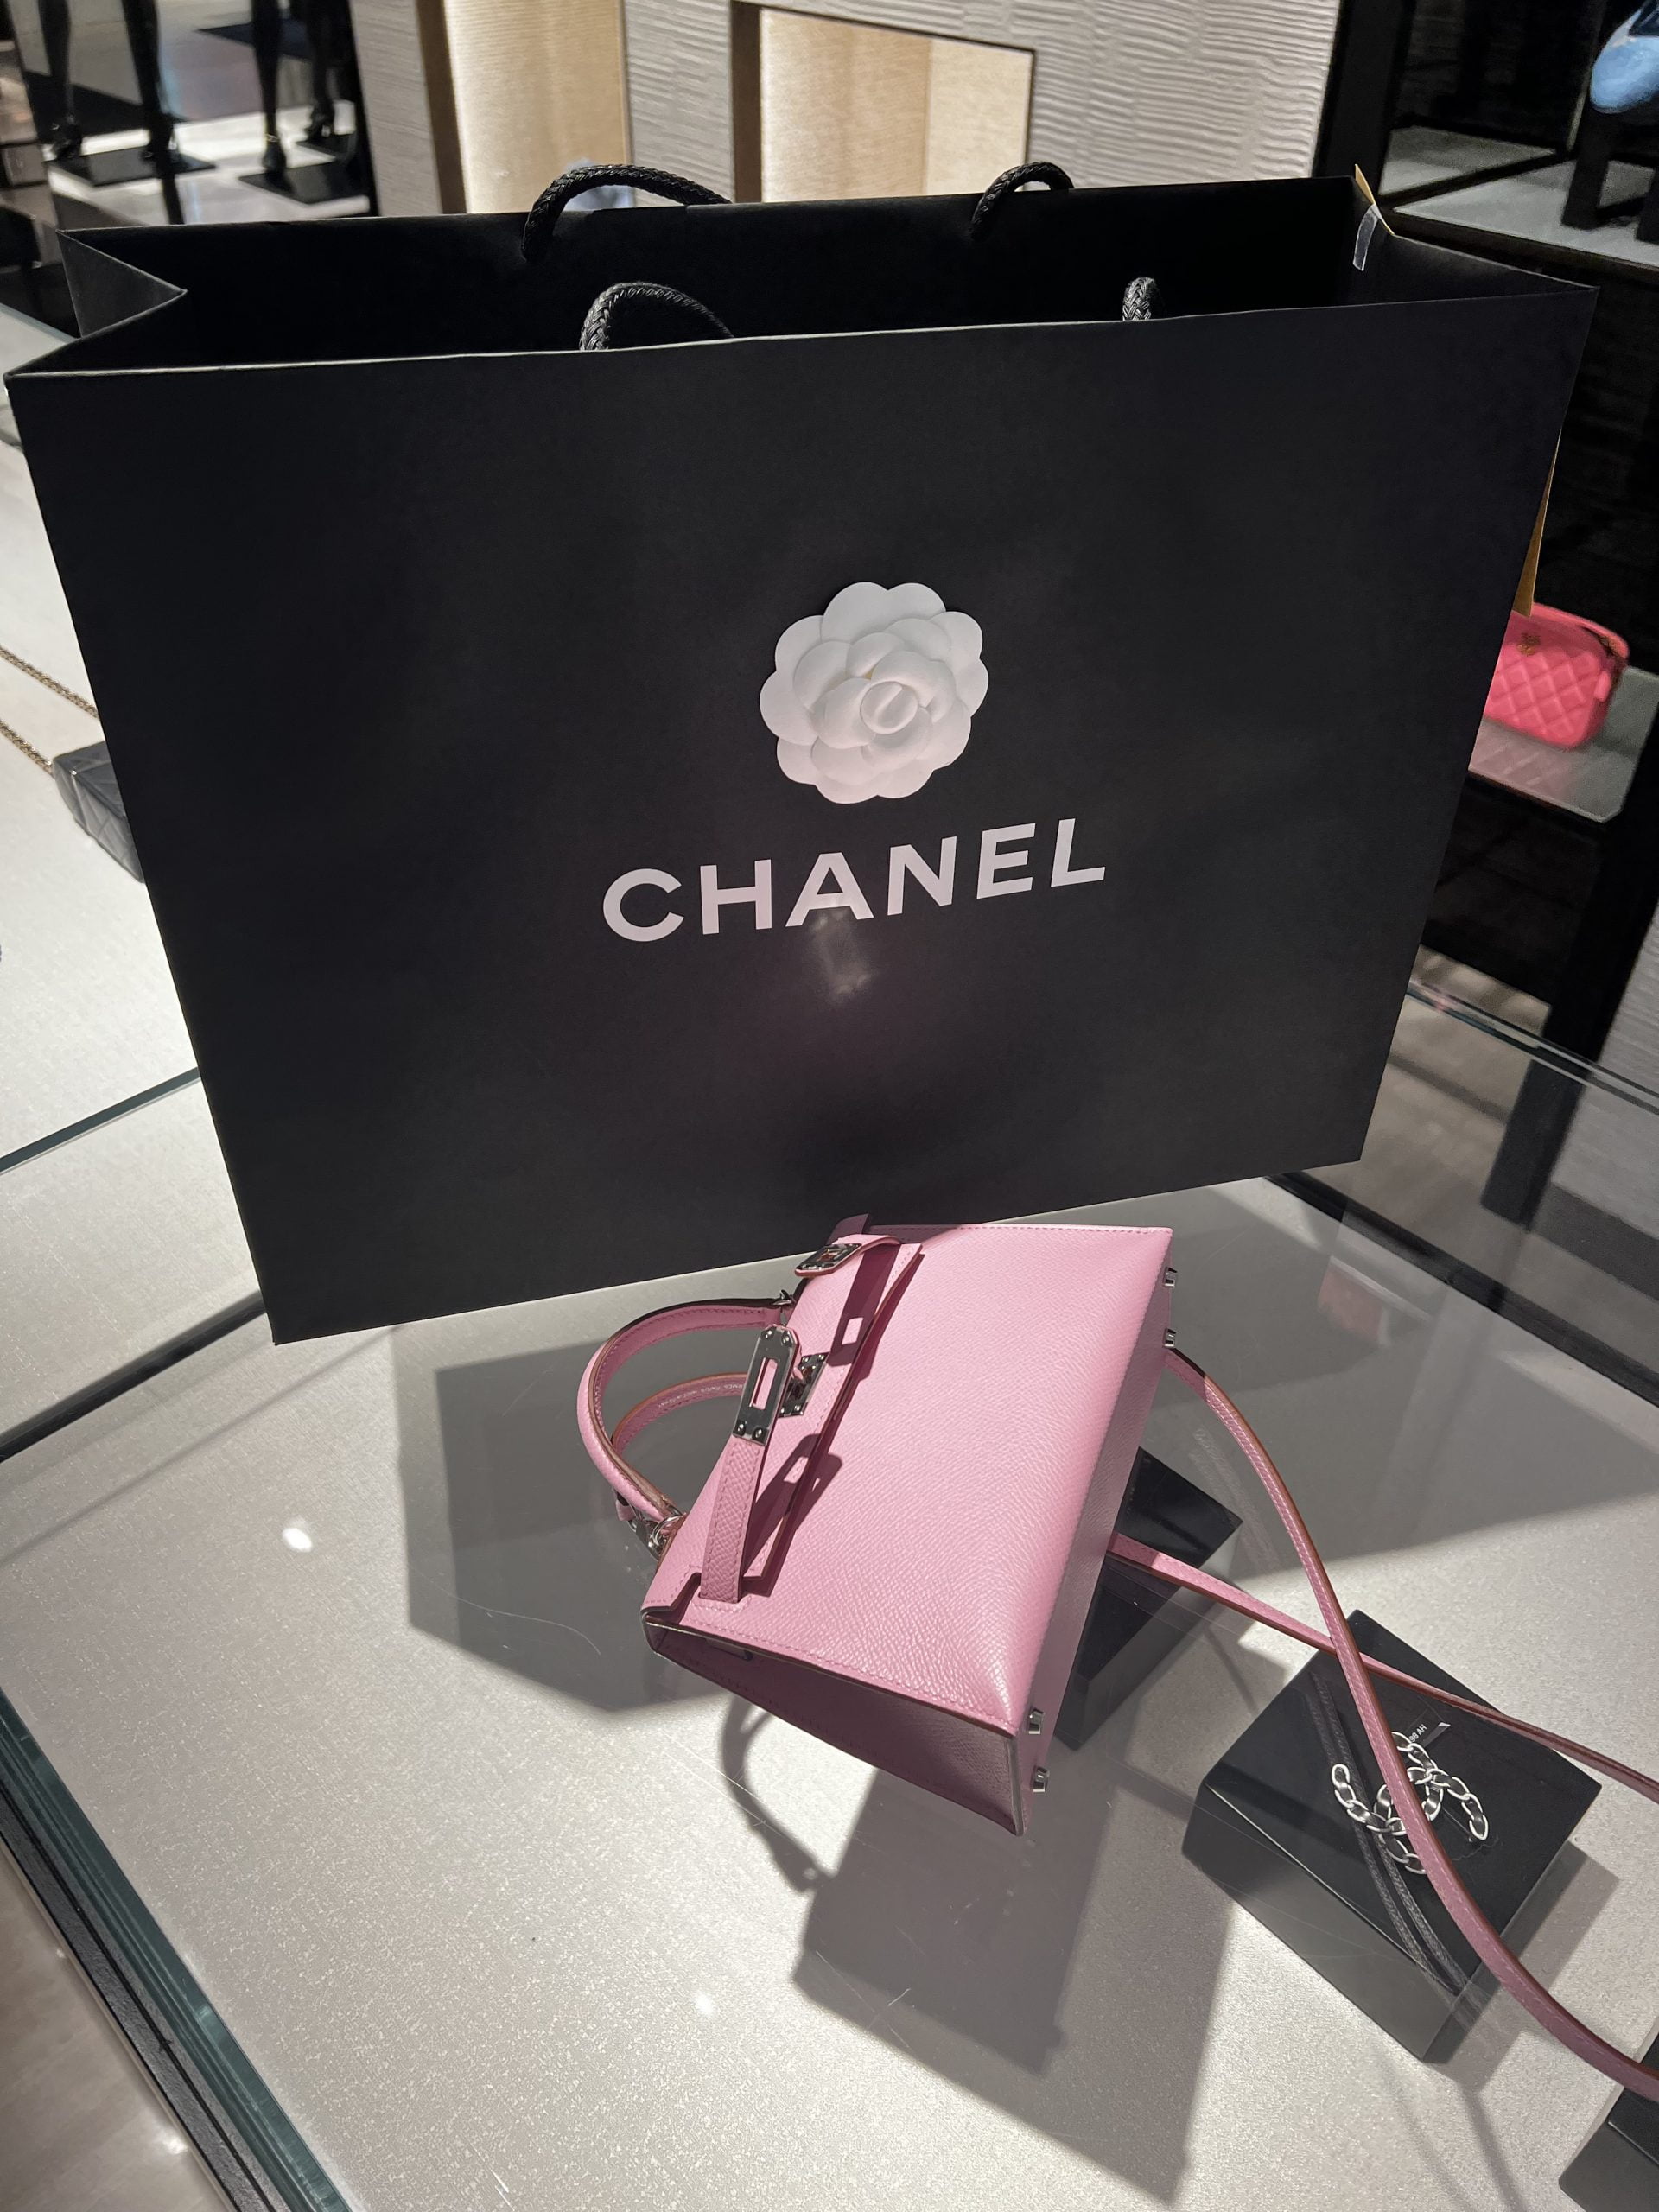 my other bag is chanel, Tumblr